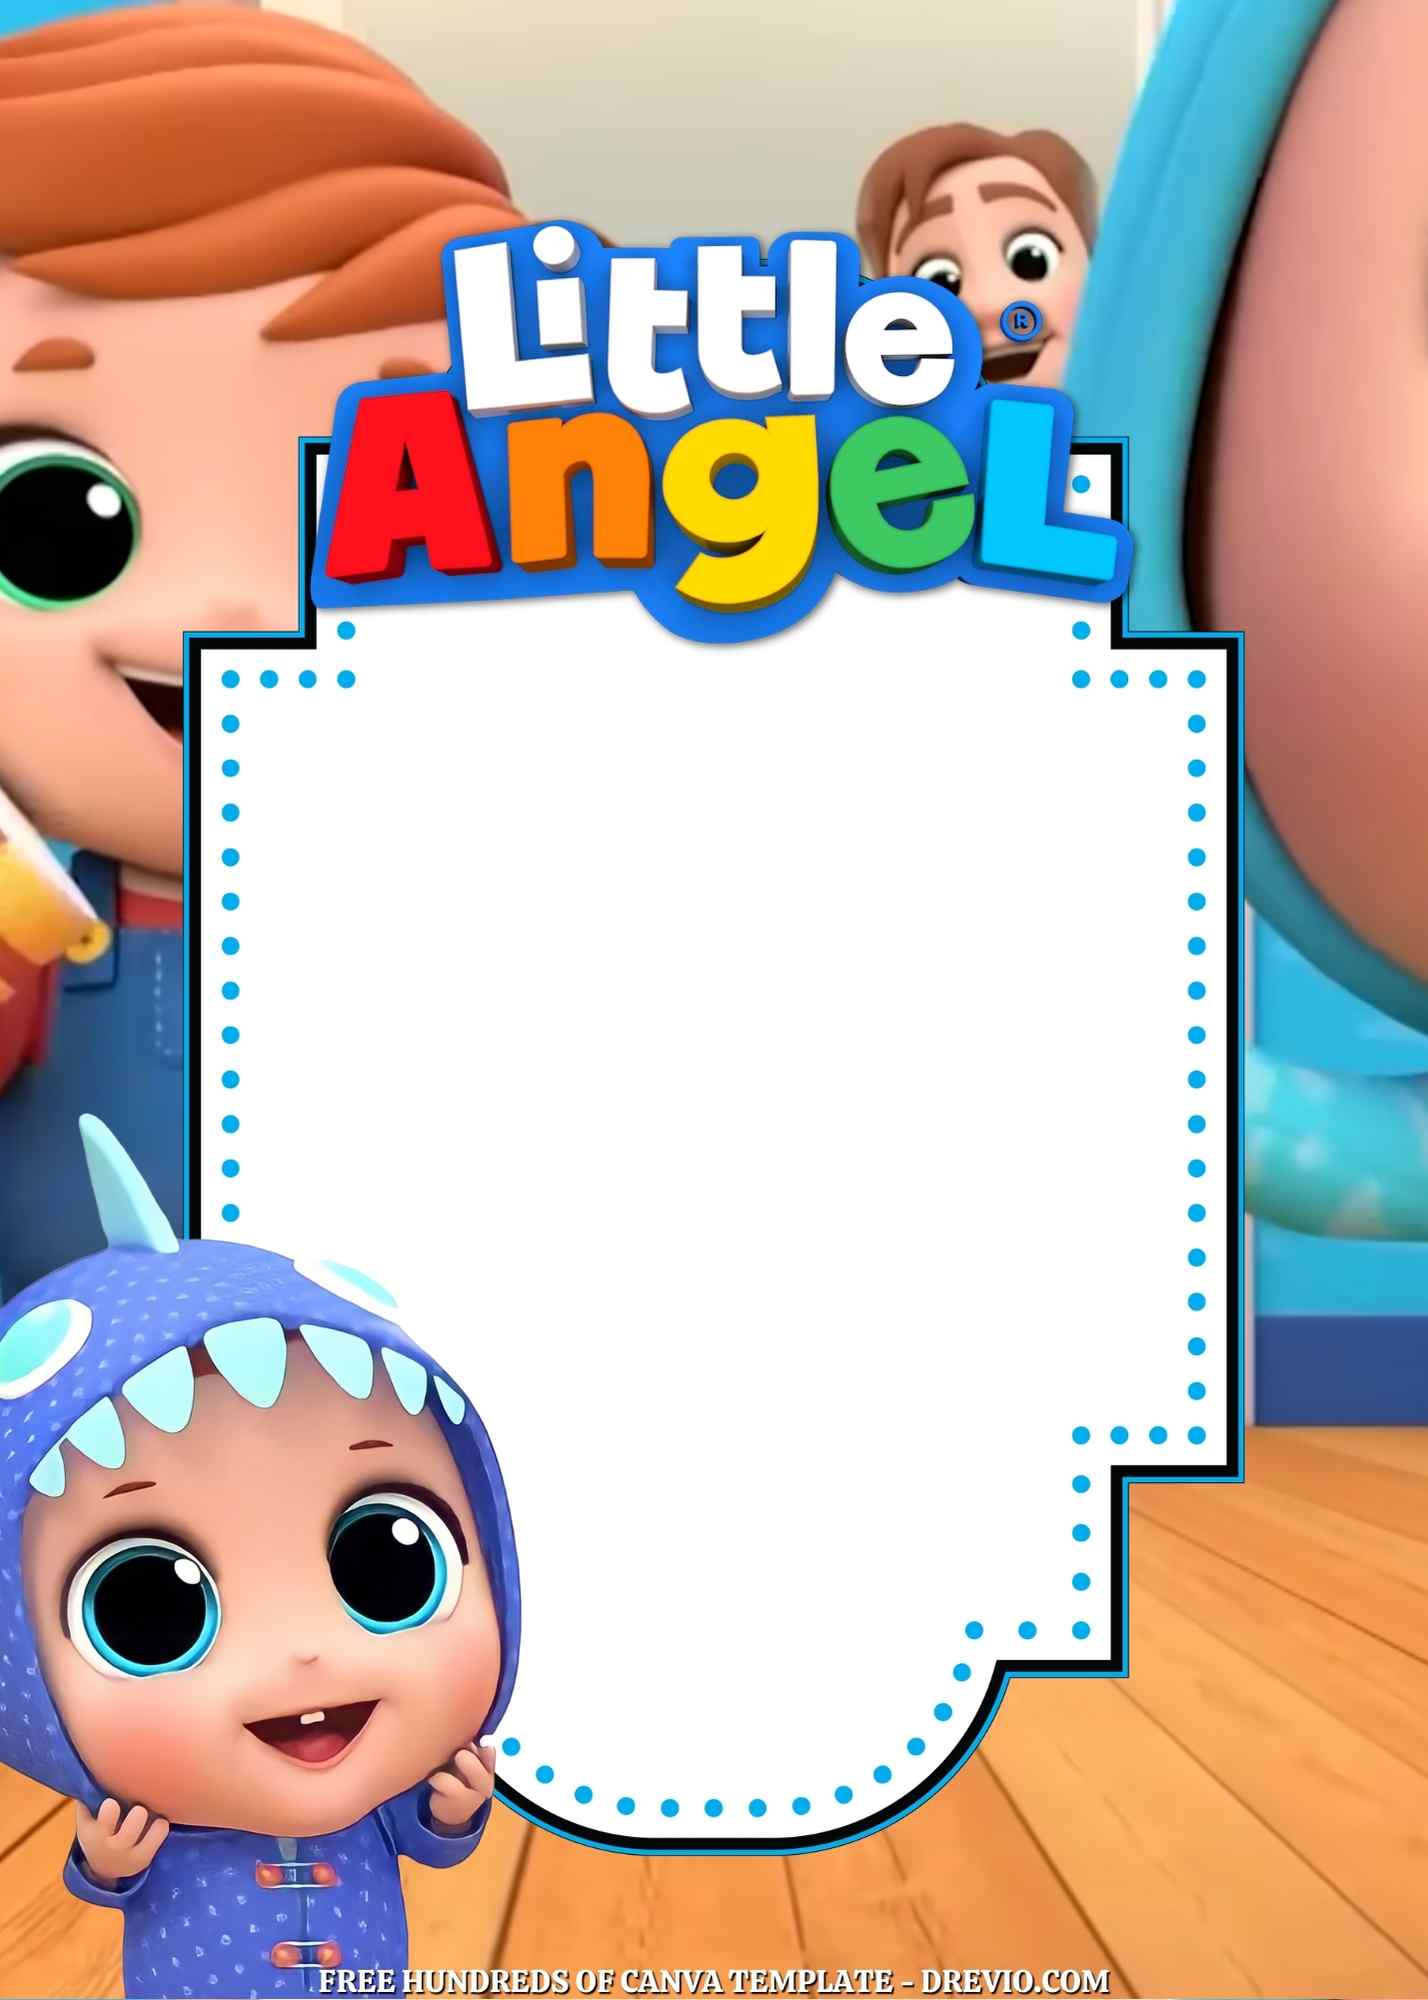 Little Angel  Channel Sold to Cocomelon Owner – The